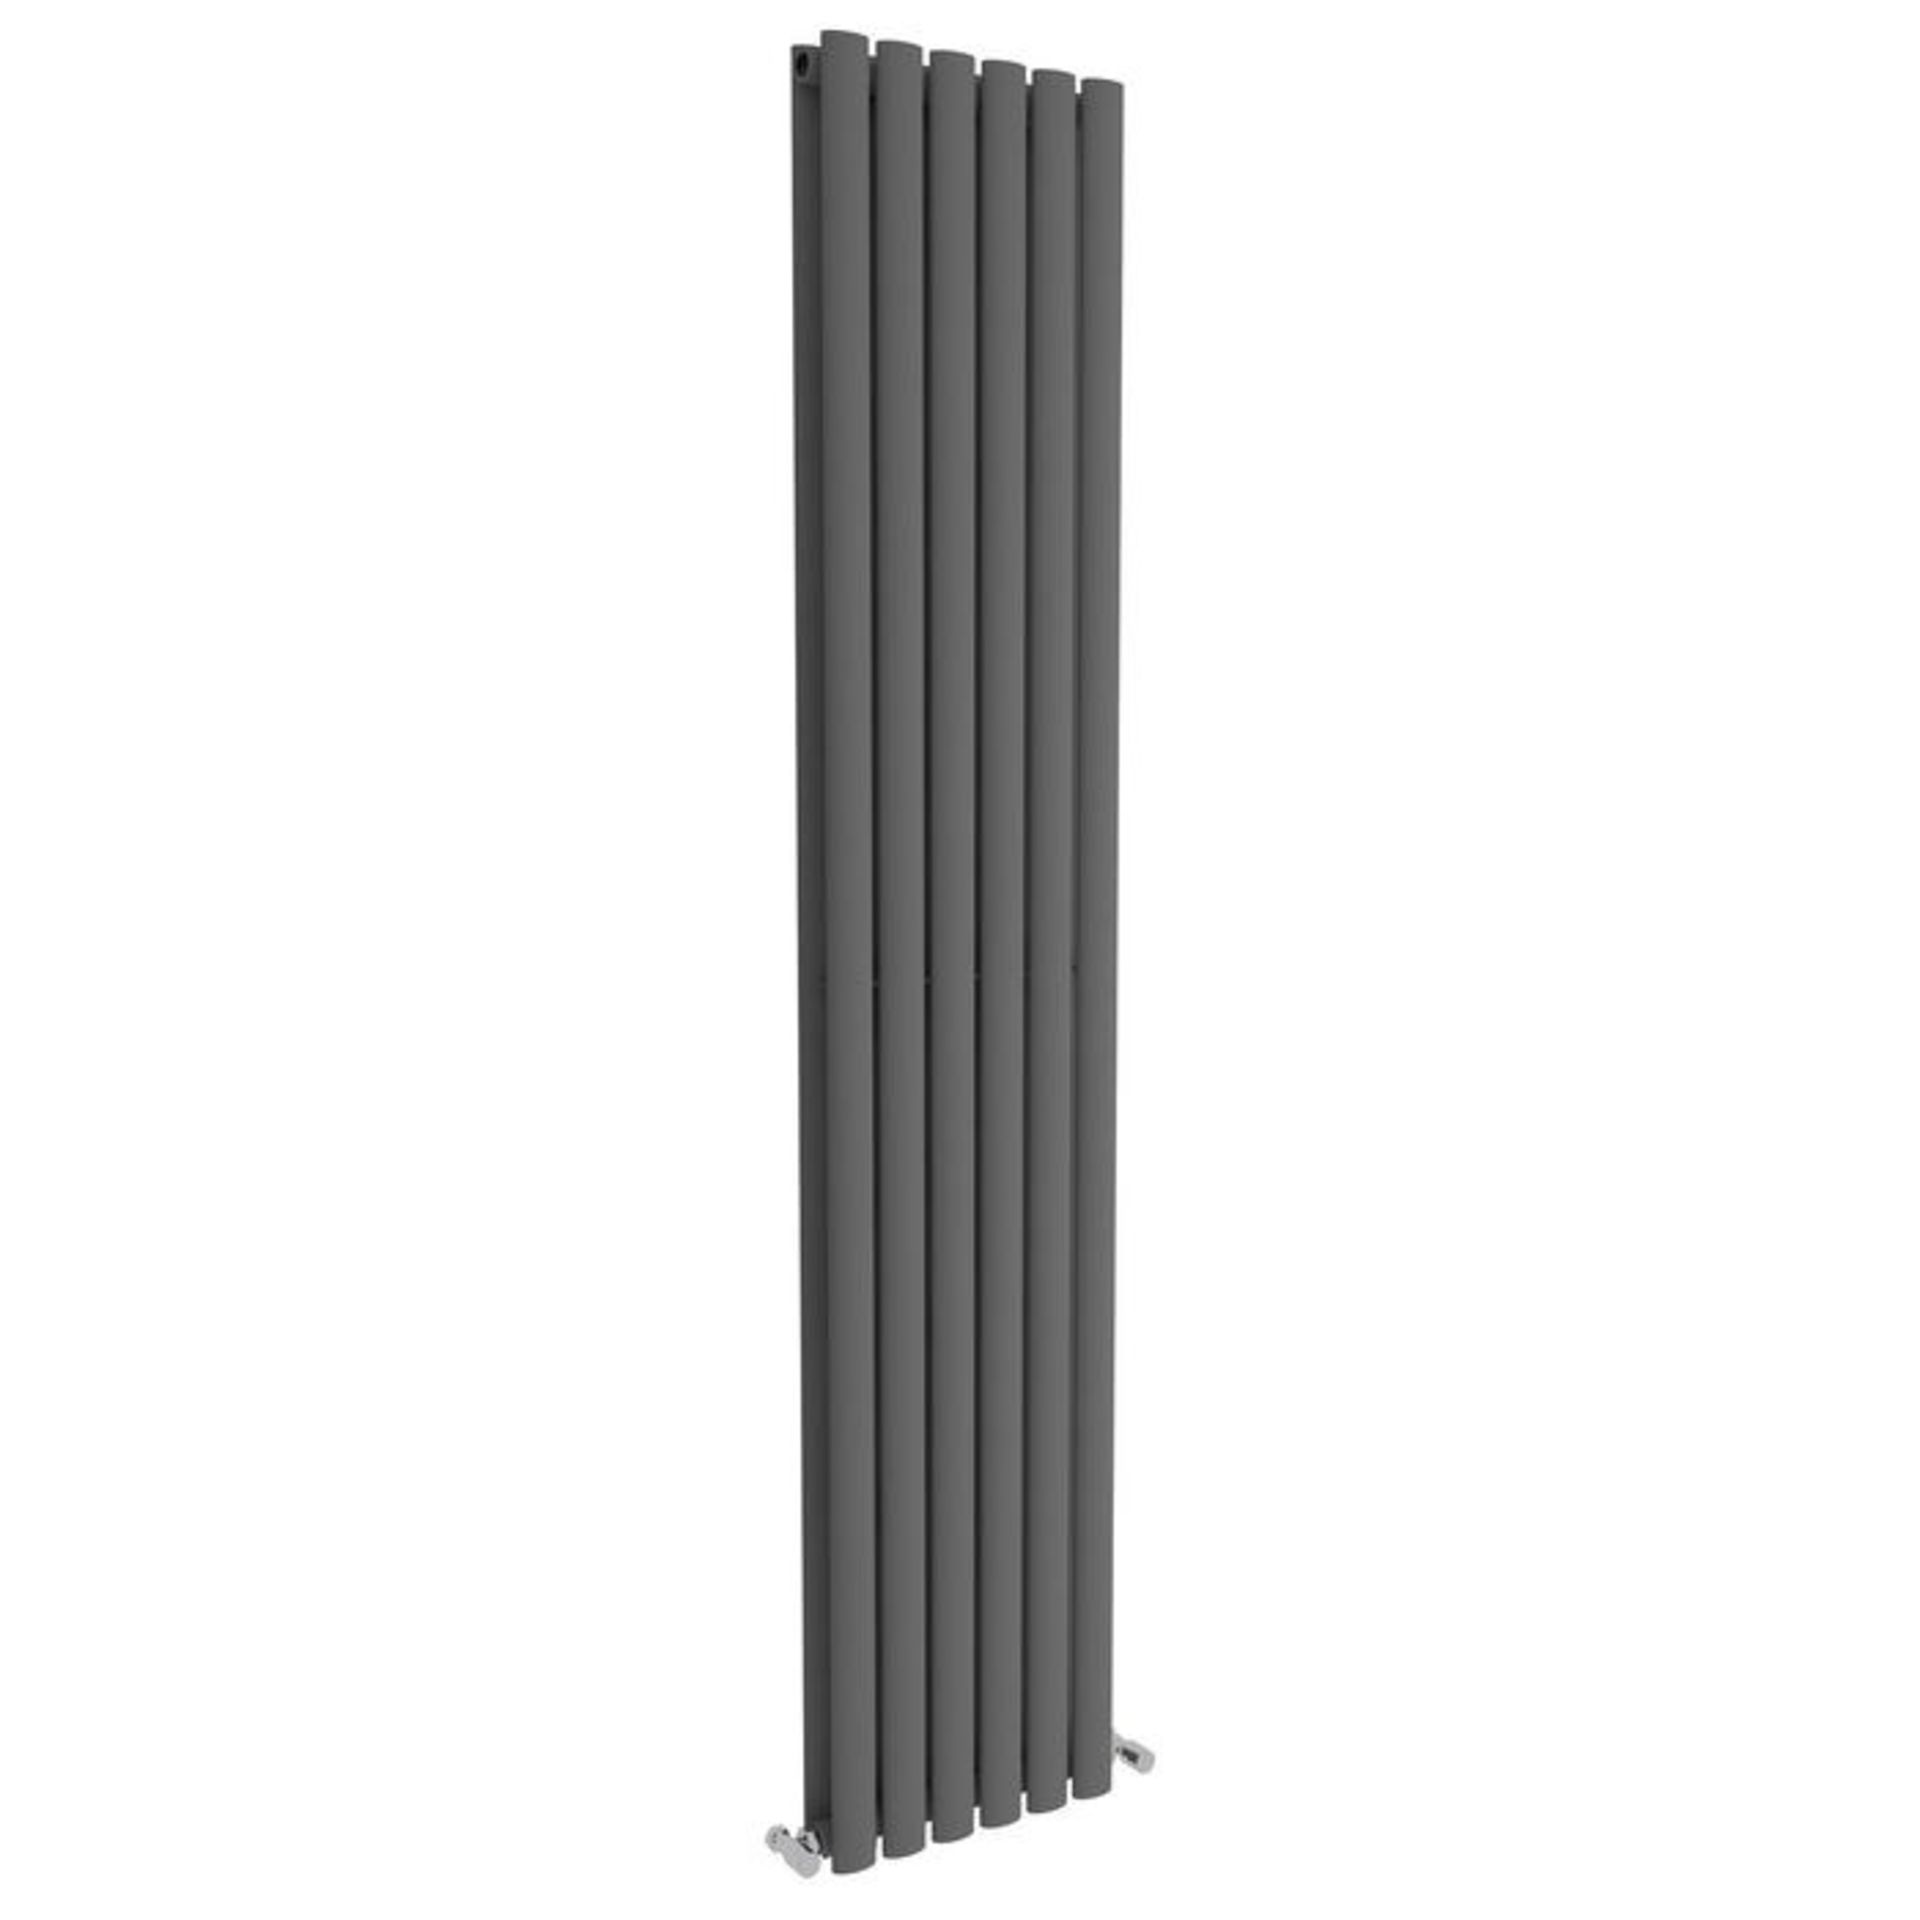 1800x360mm Anthracite Double Oval Tube Vertical Radiator. RRP £469.99.Made from high quality ... - Image 3 of 3